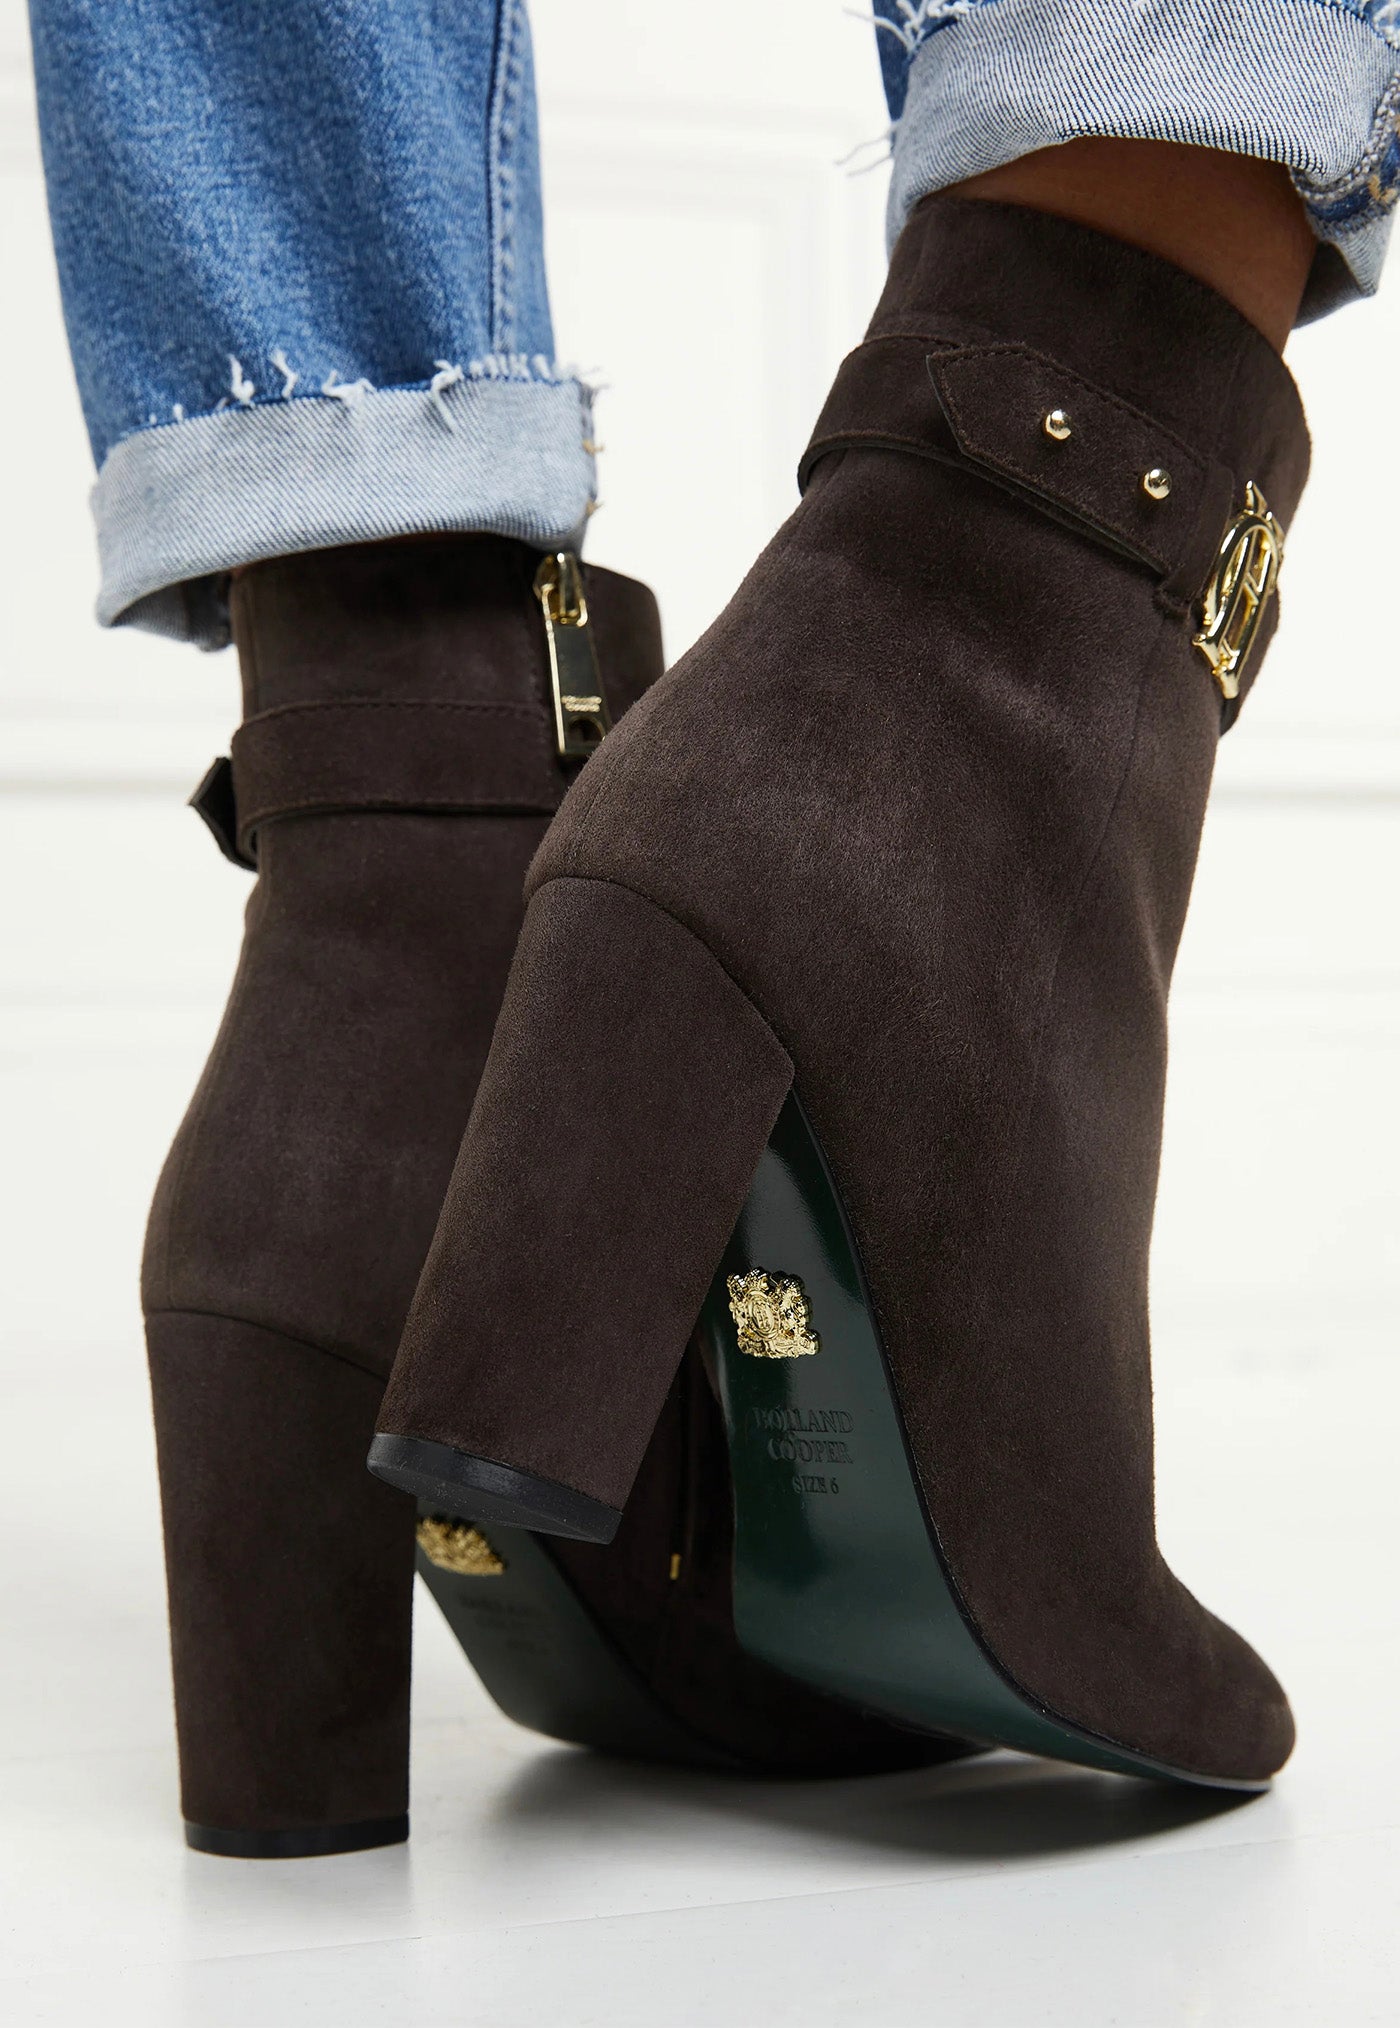 Mayfair Suede Ankle Boot - Chocolate sold by Angel Divine